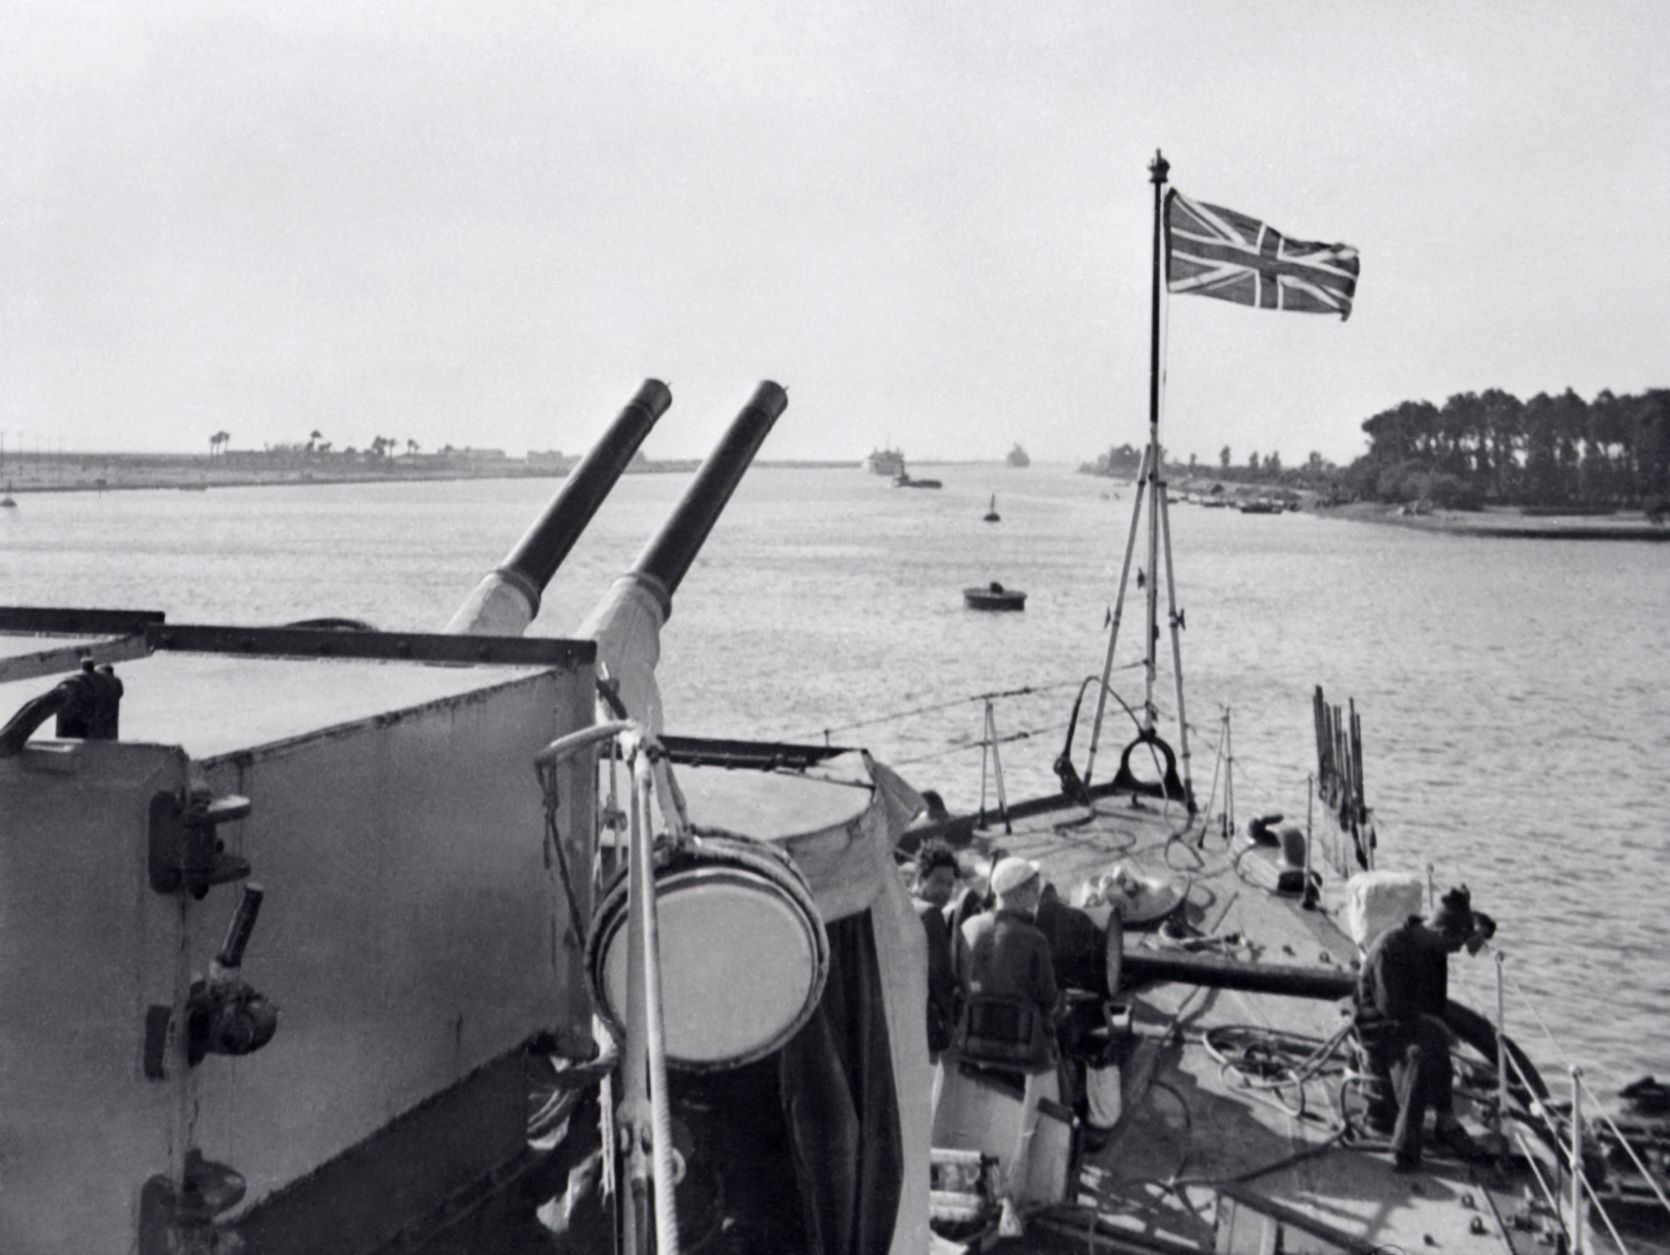 File photo from the early 1950s of a British ship at anchor near the banks of the Suez Canal in Egypt (AFP)